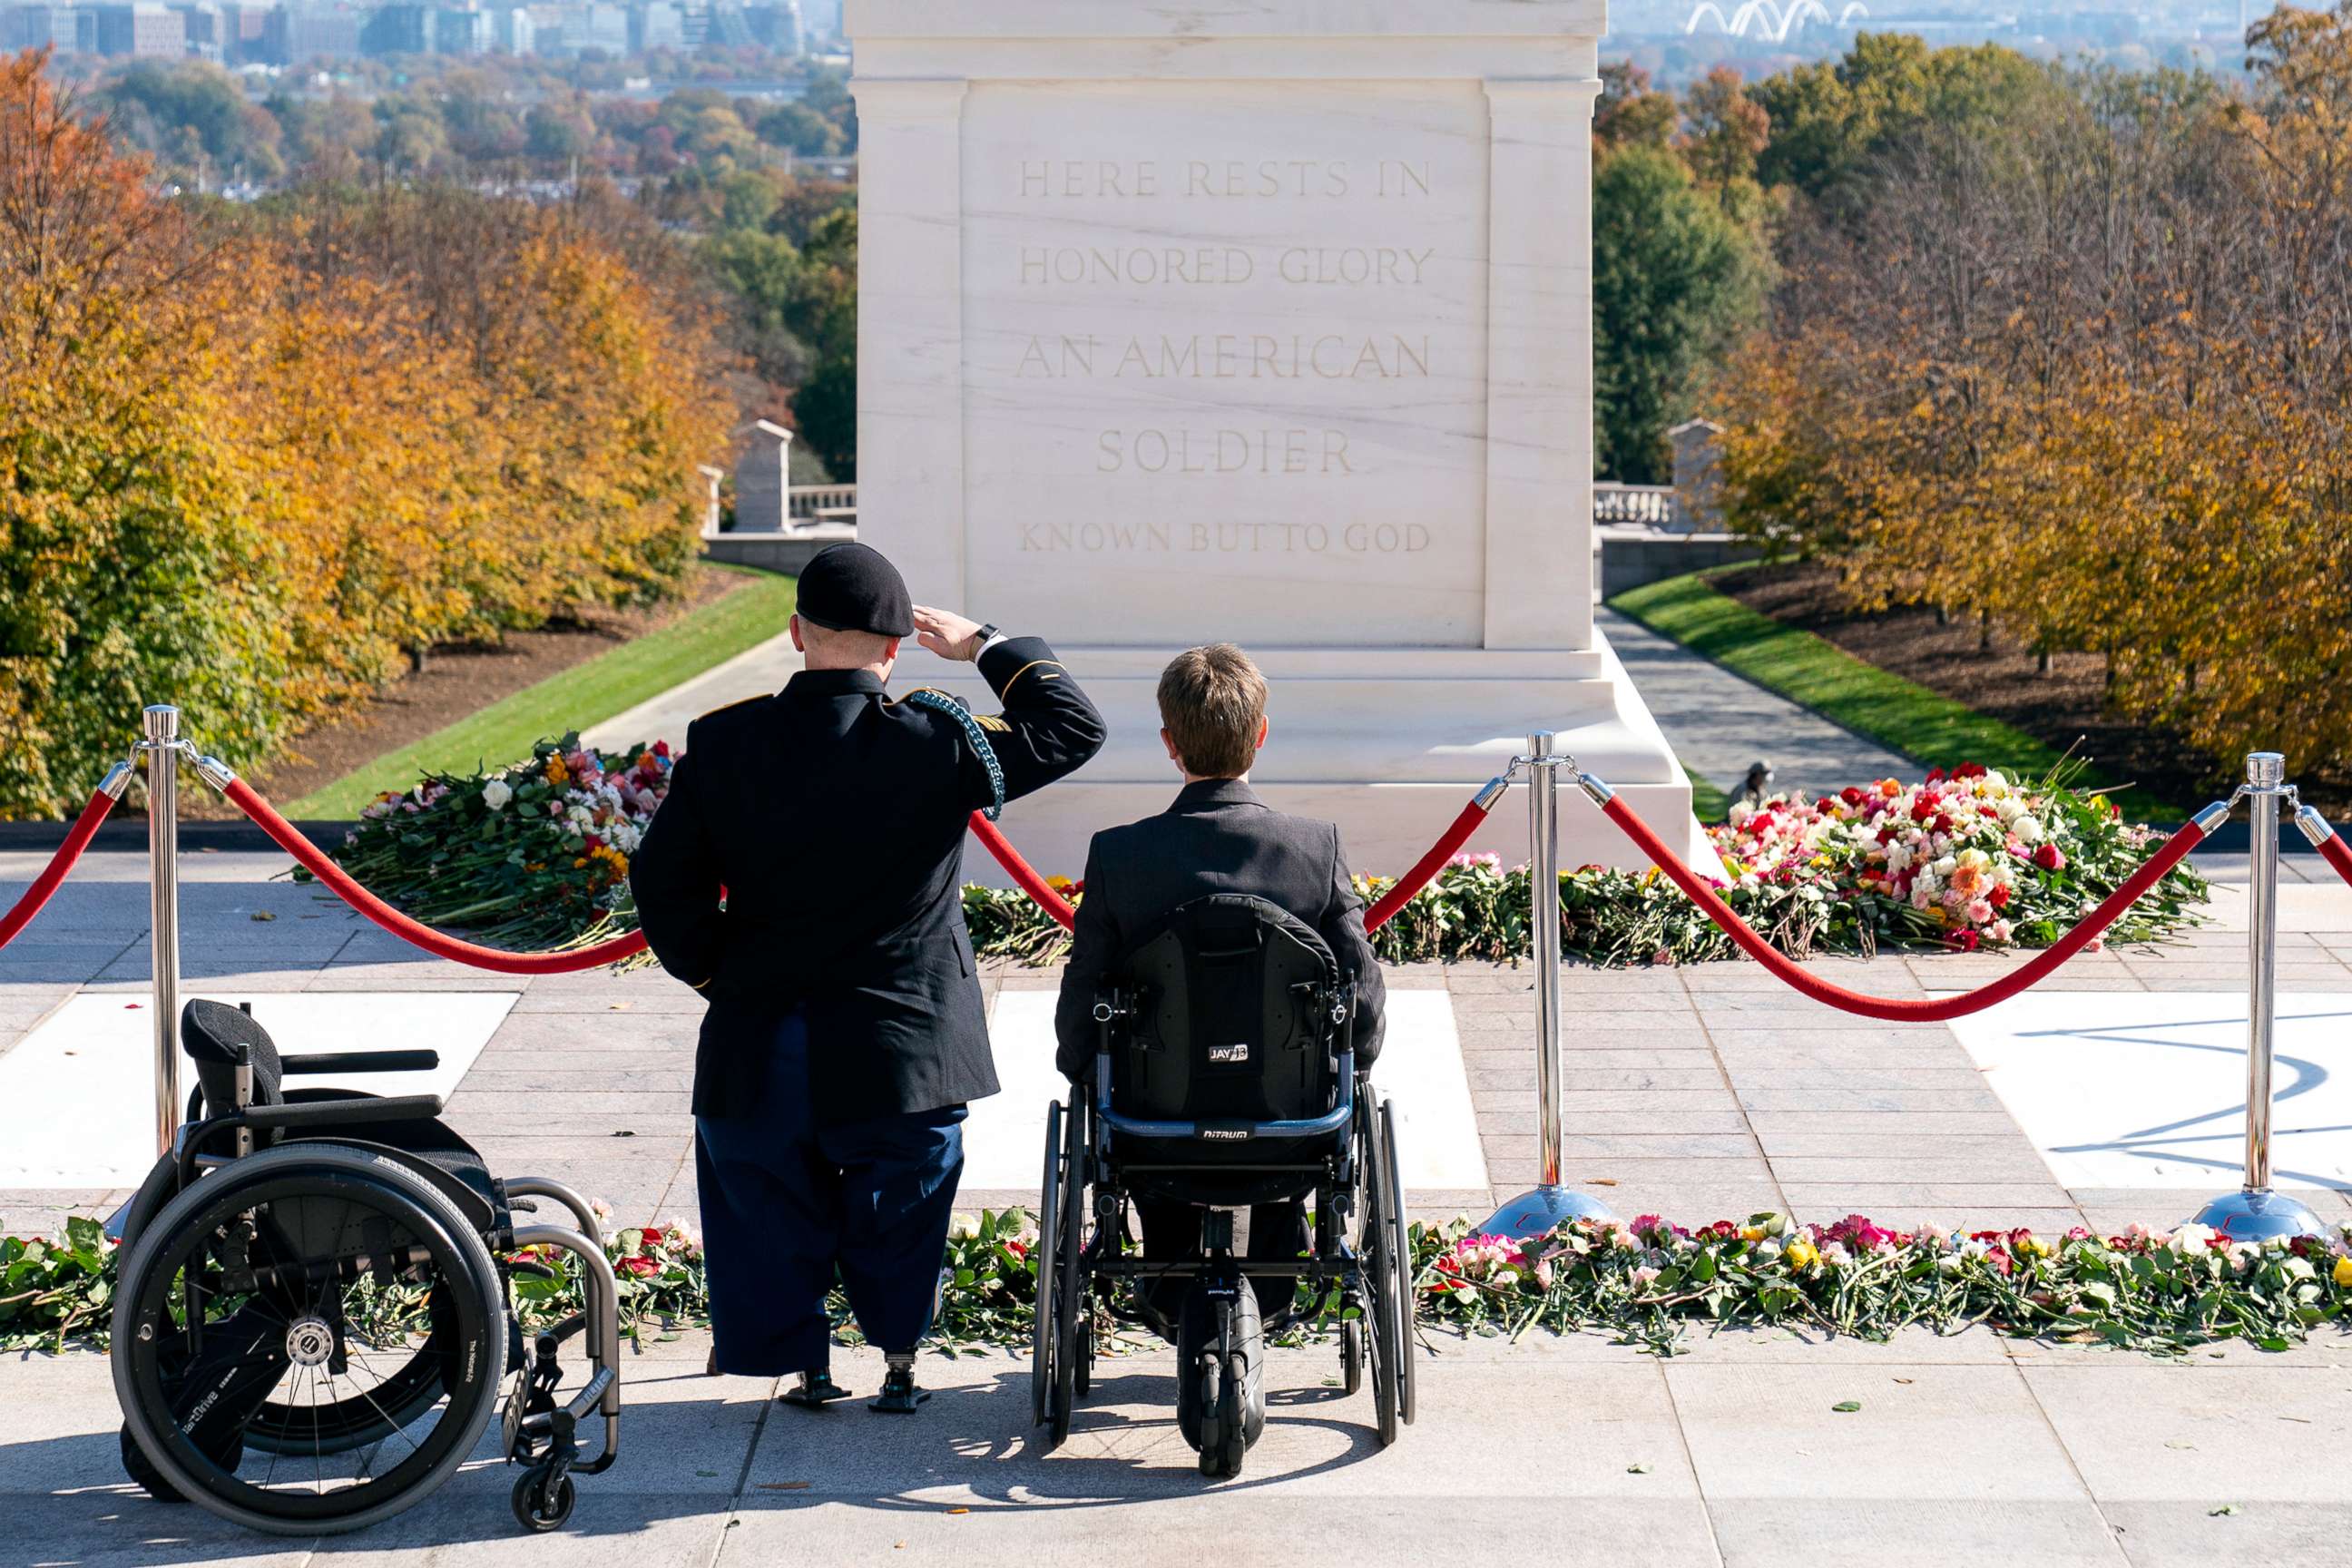 PHOTO: U.S. Army Sgt. Brian Pomerville, left, stands and salutes with his wife Tiffany Lee, after placing flowers during a centennial commemoration event at the Tomb of the Unknown Soldier, in Arlington National Cemetery, Nov. 10, 2021, in Arlington, Va.